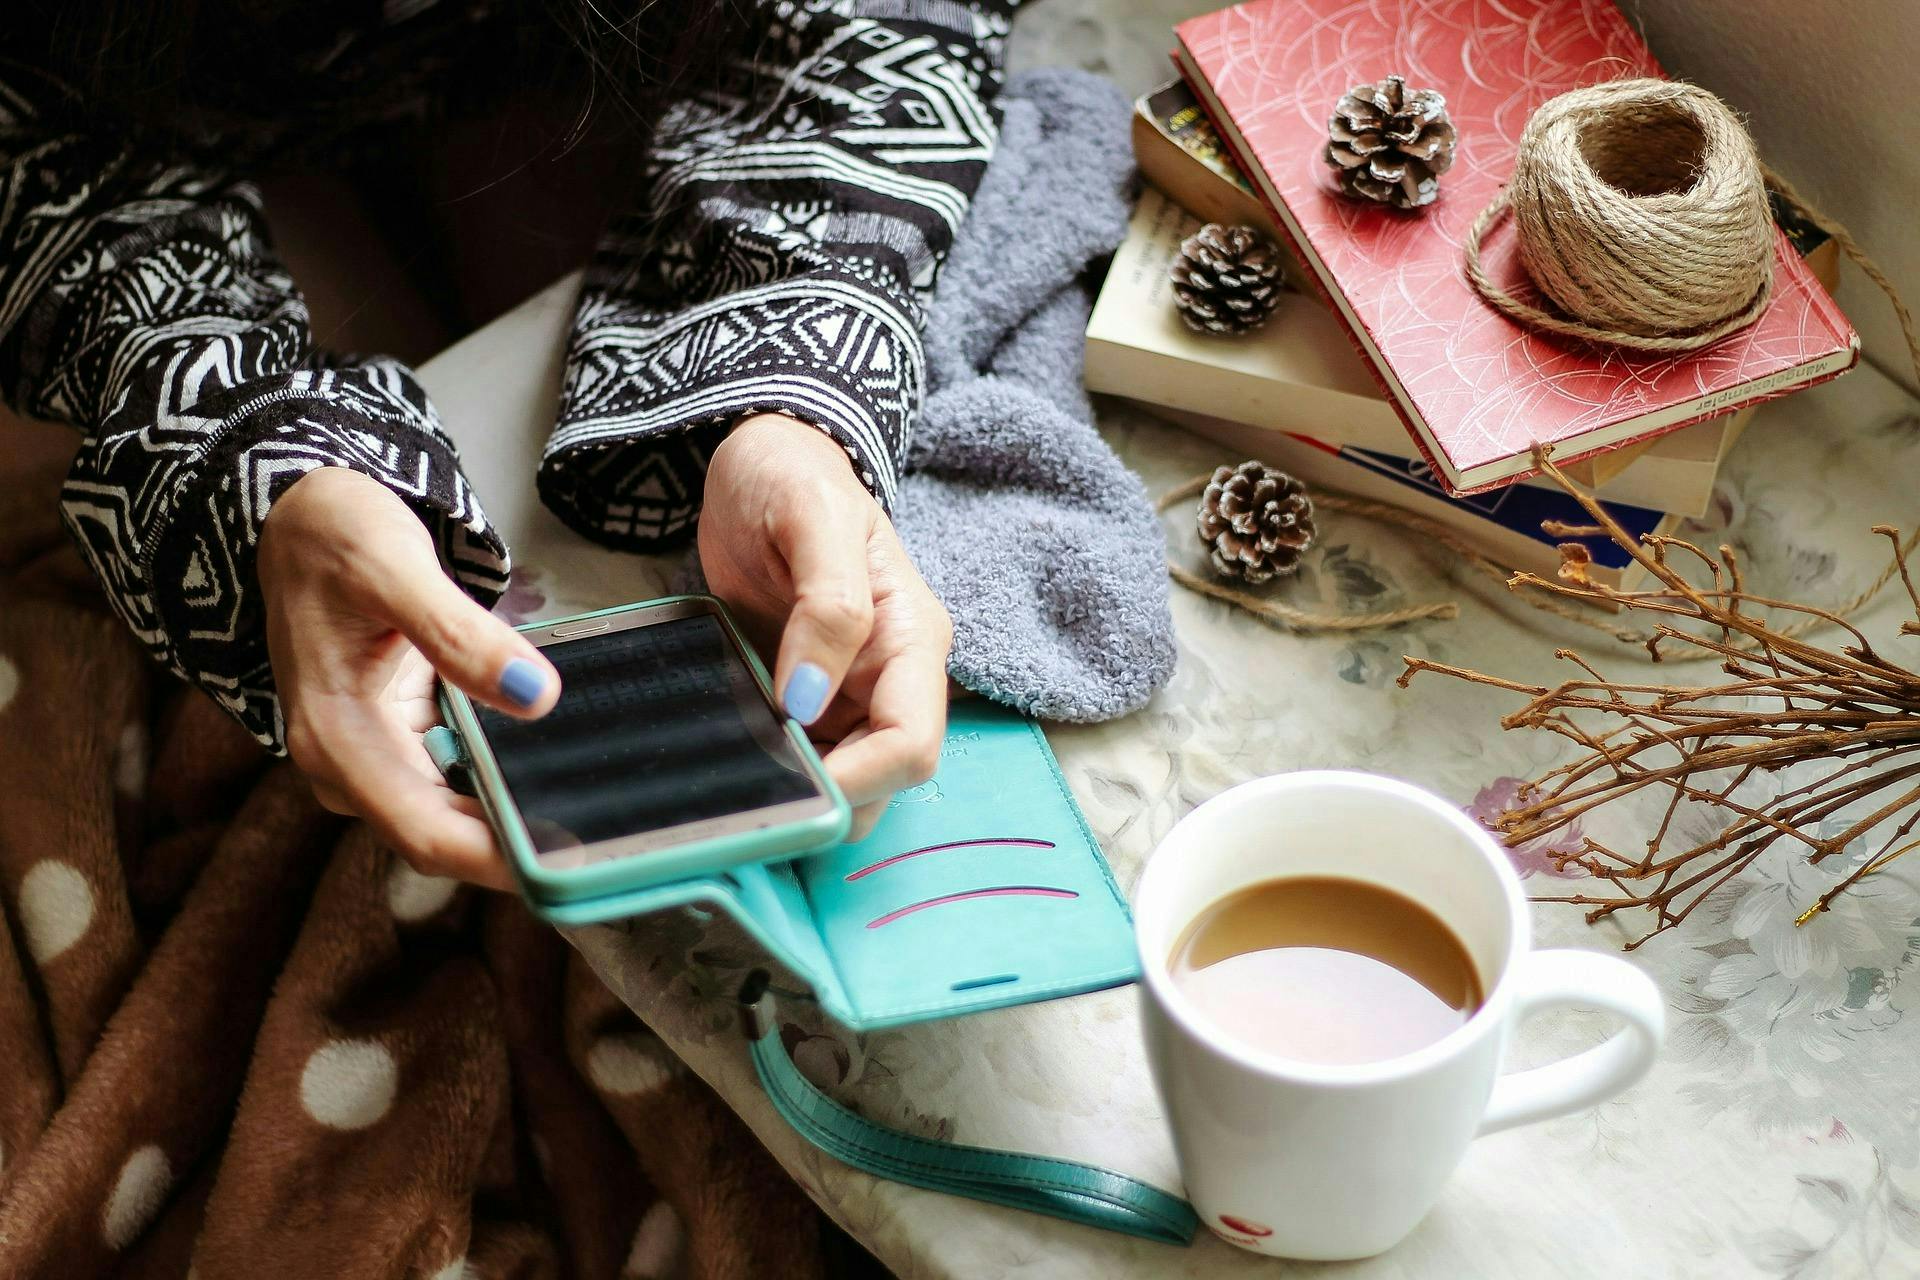 Person looking at a phone with a cup of coffee and books. You can tune-in to live shopping streams from multiple different social media platforms.